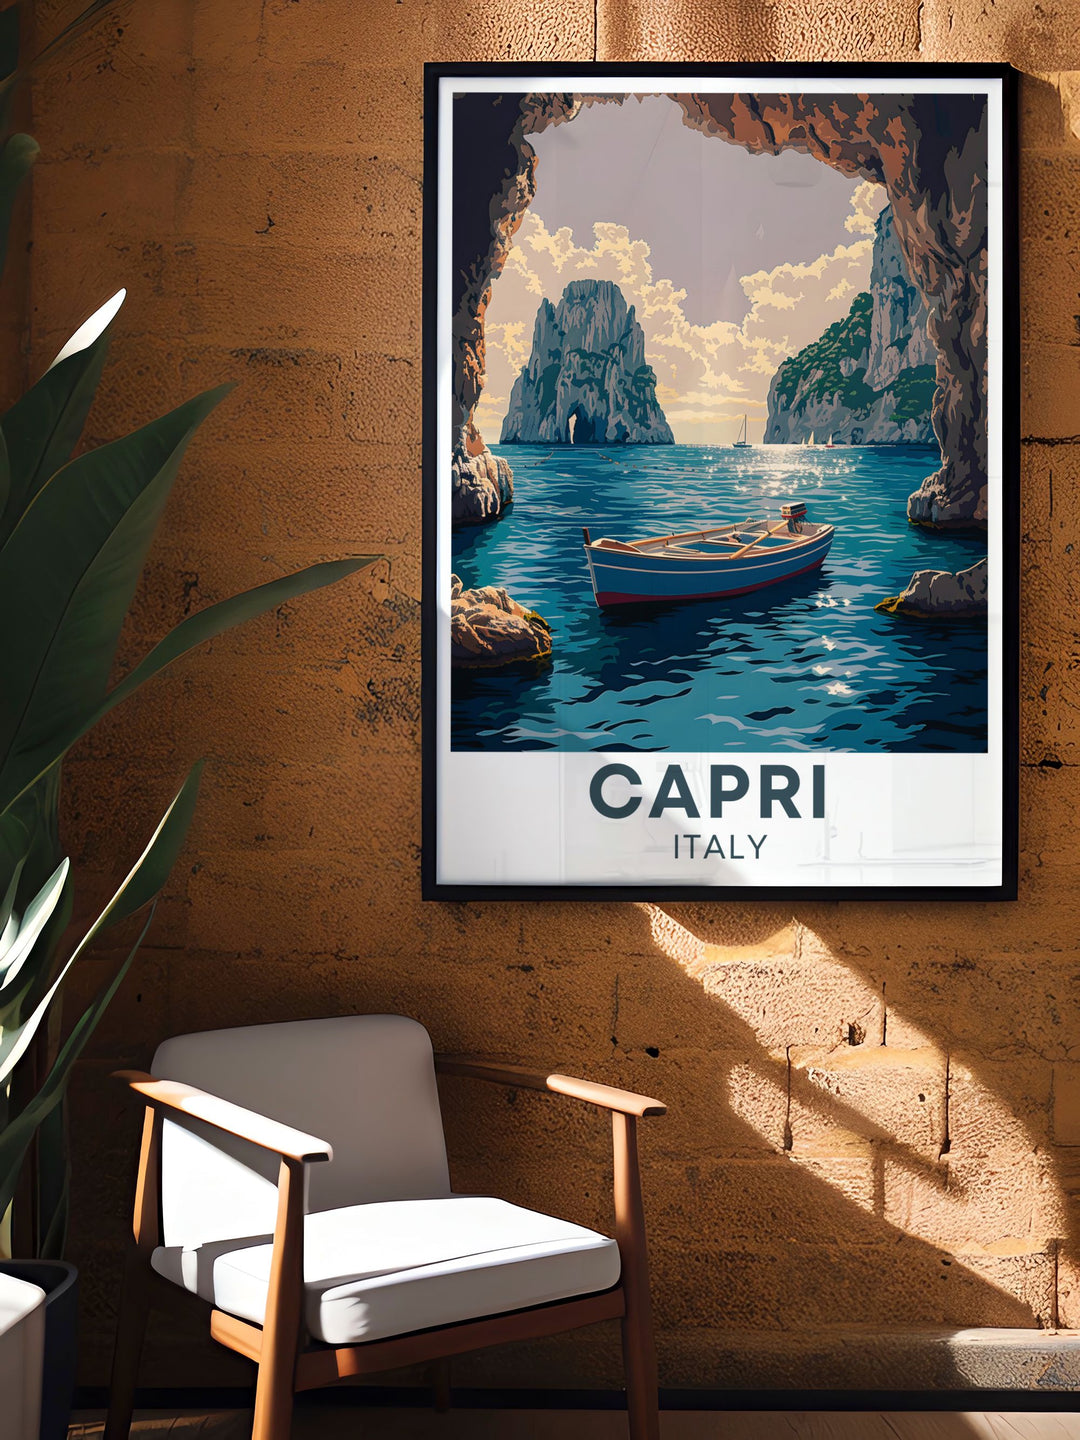 This travel poster captures the mystical Blue Grotto of Capri, featuring its striking blue waters and tranquil atmosphere. Ideal for adding a touch of Italys natural splendor to your home decor and celebrating one of its most beloved landmarks.